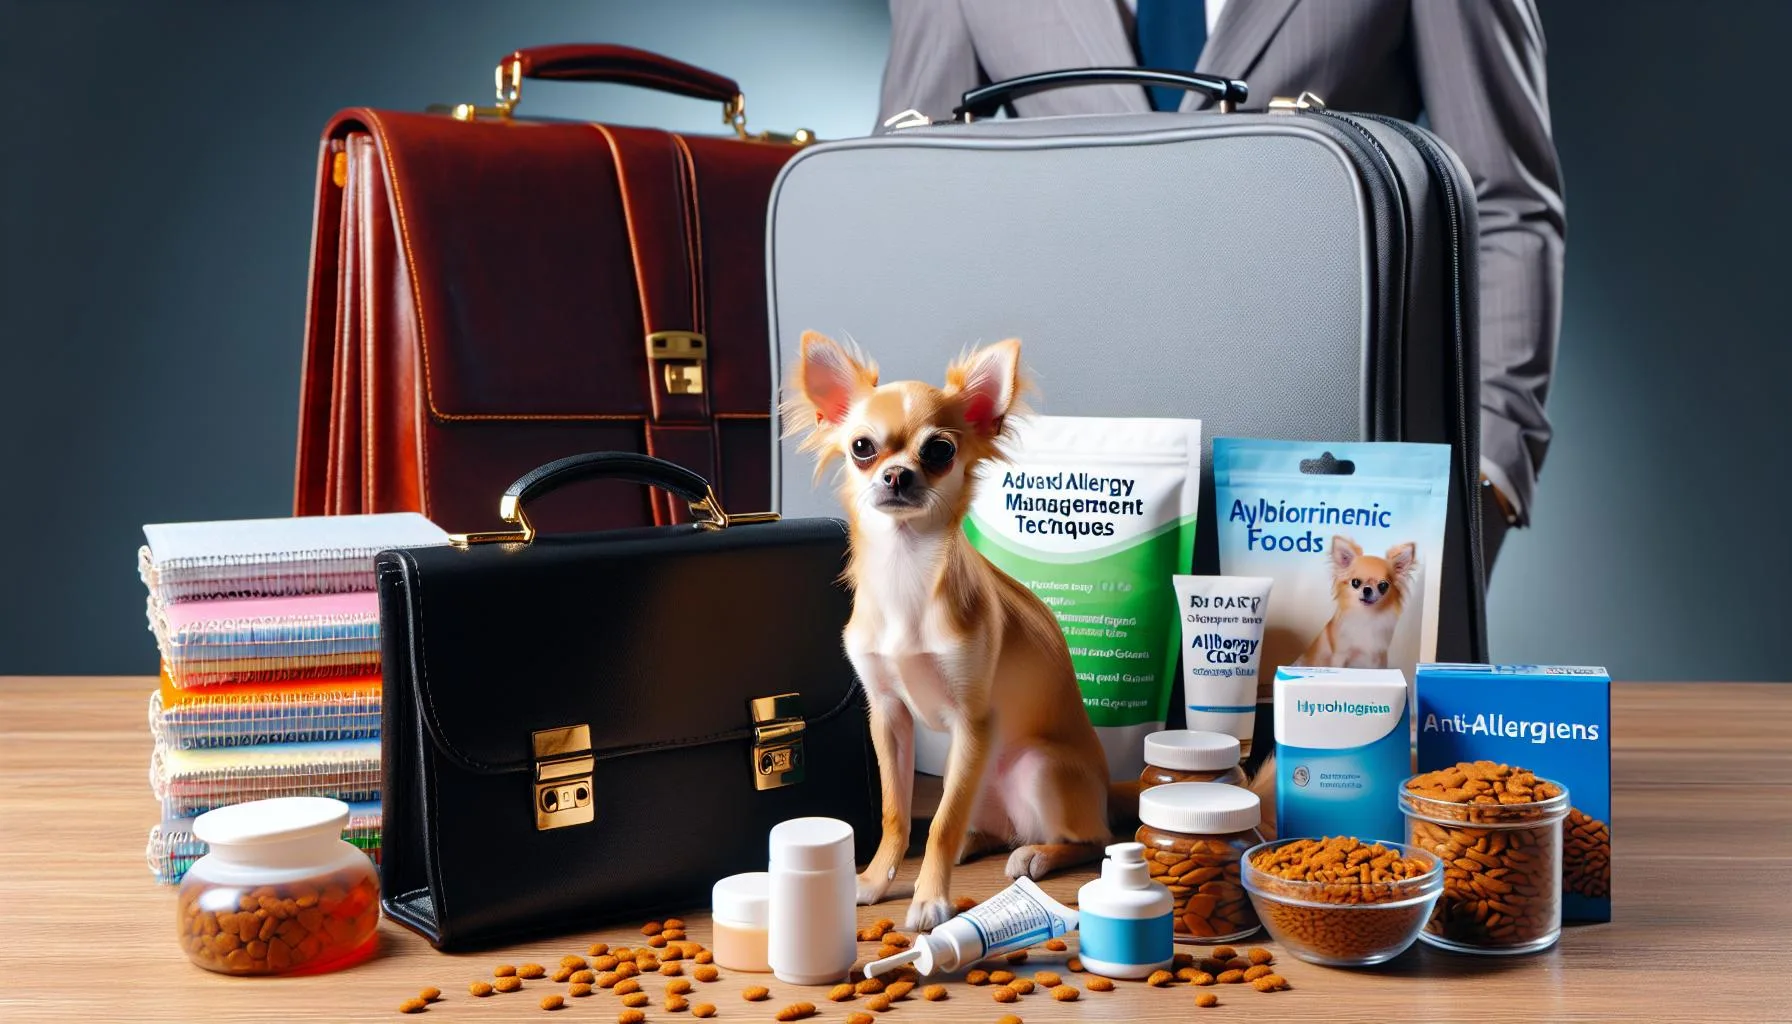 Maximize Comfort for Your Chihuahua: Try These Allergy Strategies